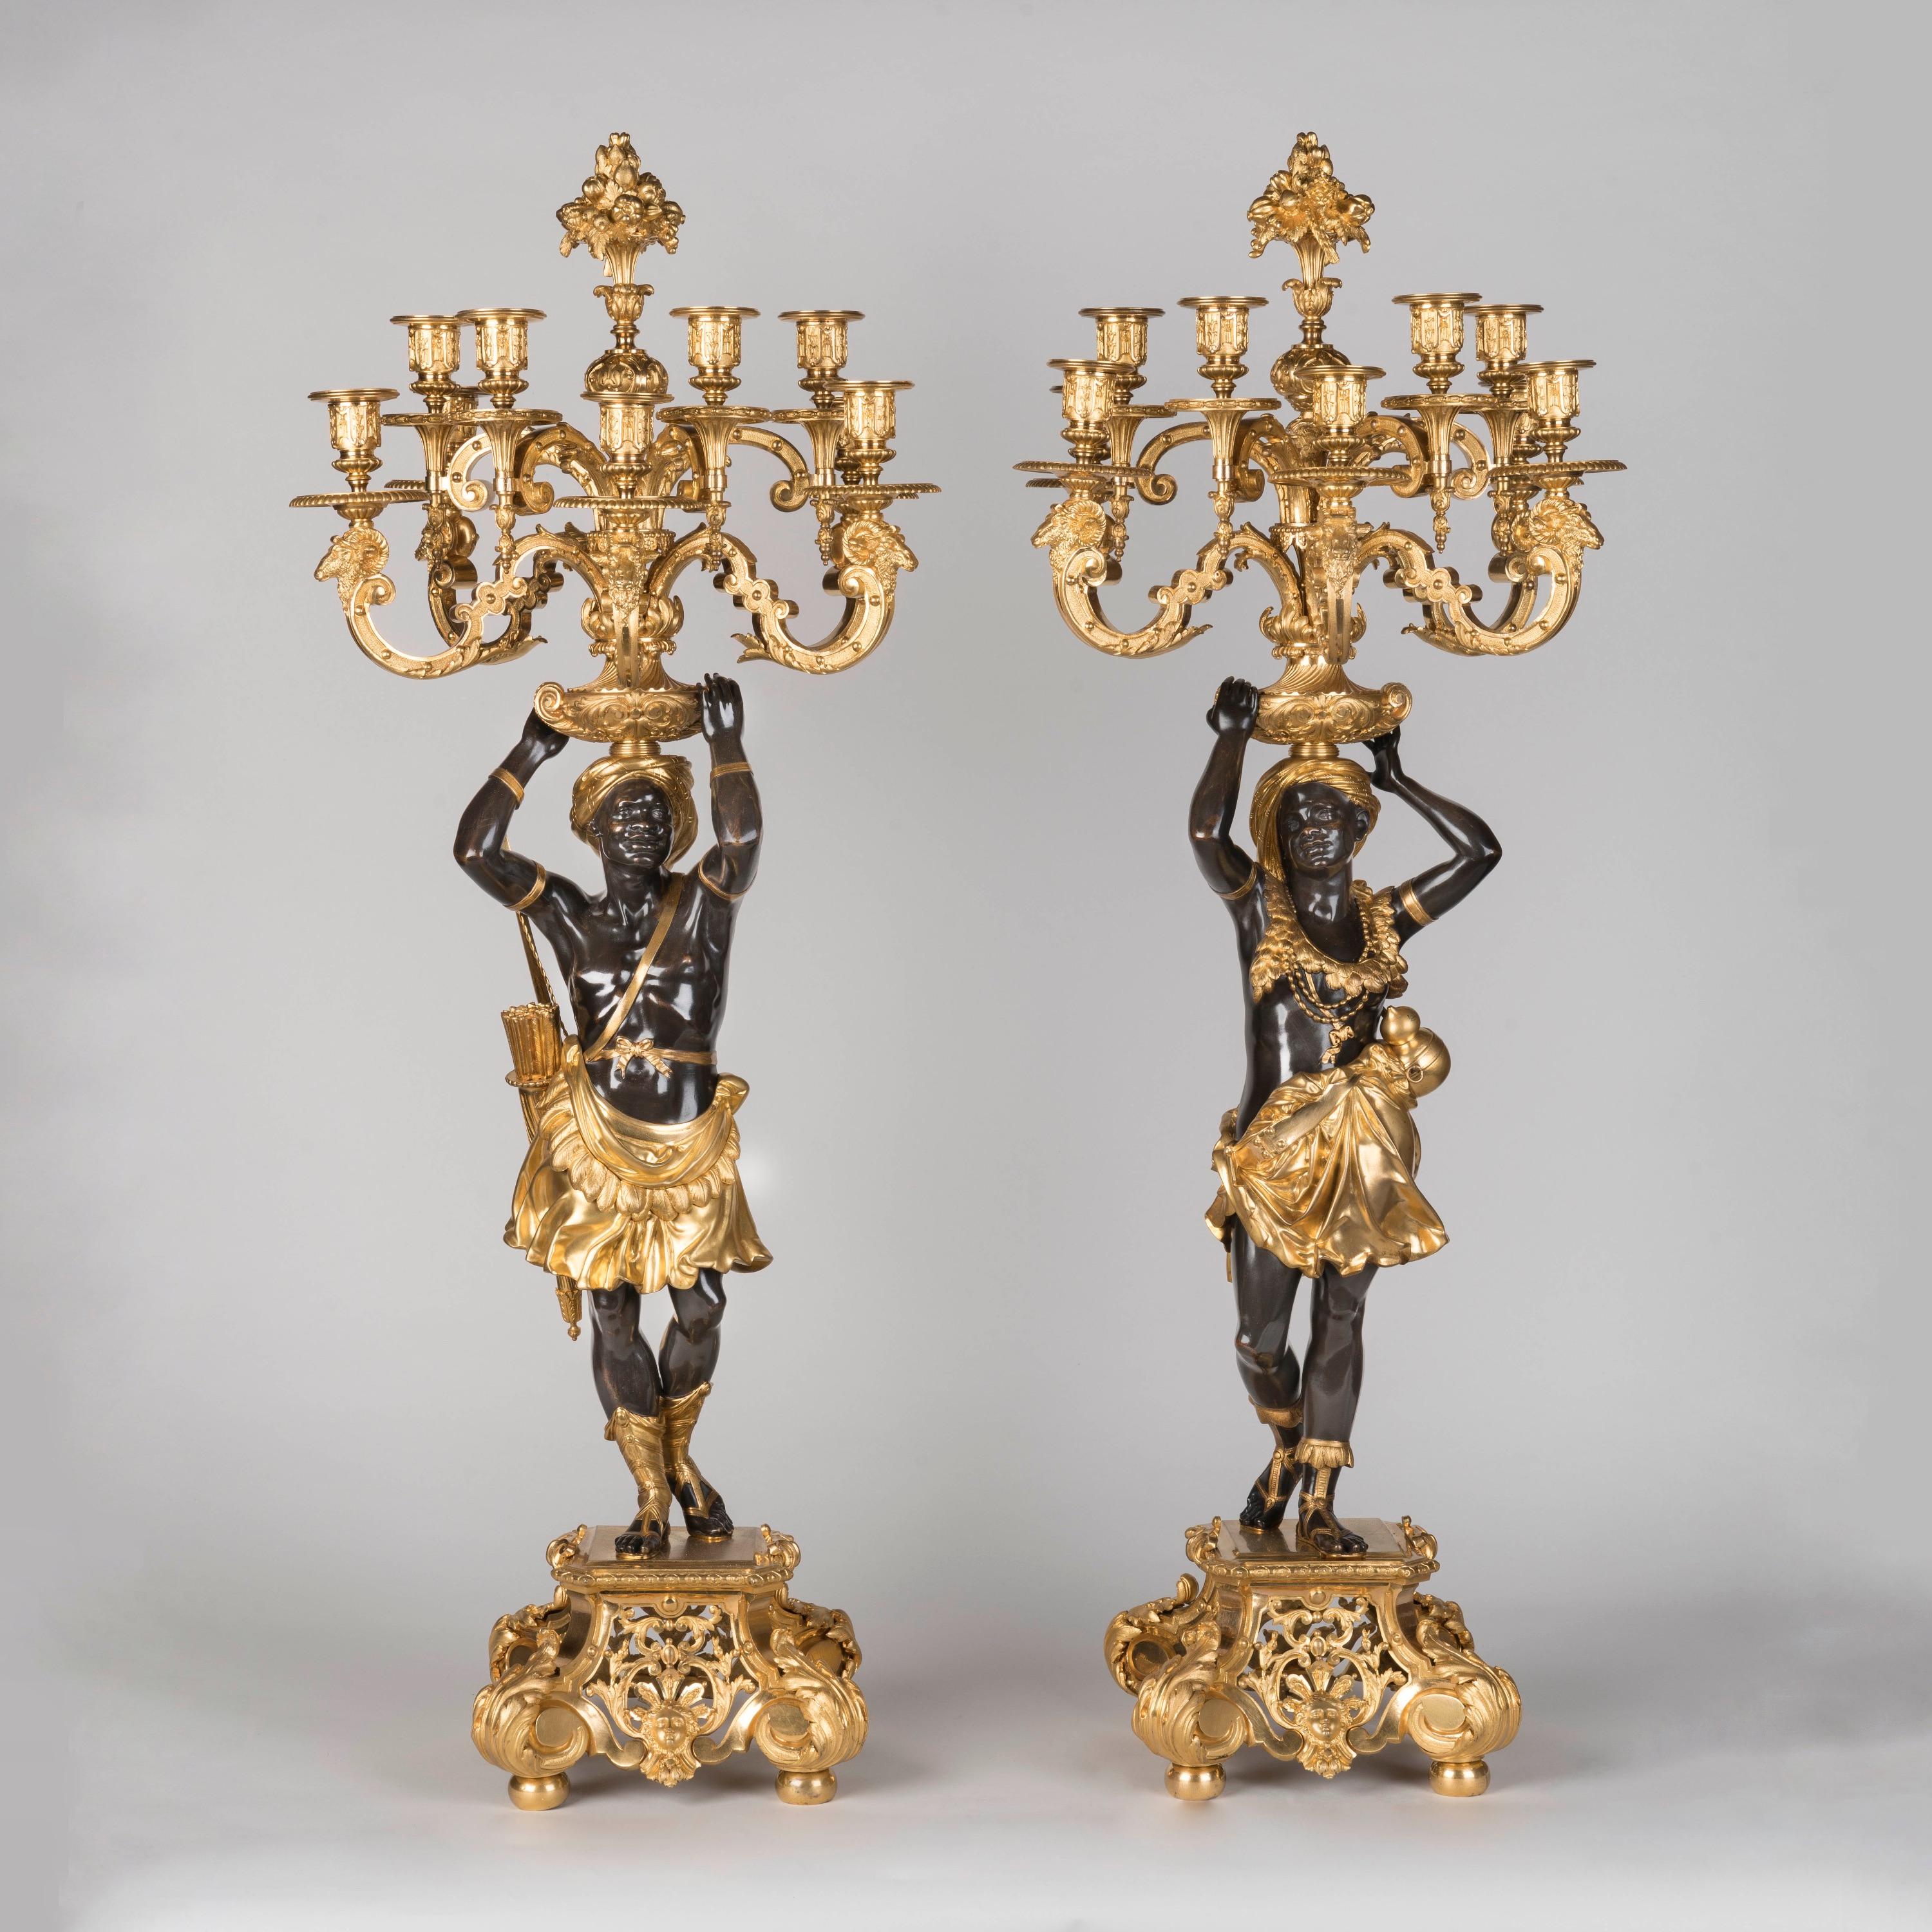 An Important Pair of Patinated & Gilt bronze Figural Candelabra
By Denière of Paris & Henri Picard

Modelled by Carrier-Belleuse (1824-1887)

Constructed from patinated and gilt bronze, in the Louis XIV manner popularised by Jean le Pautre, the